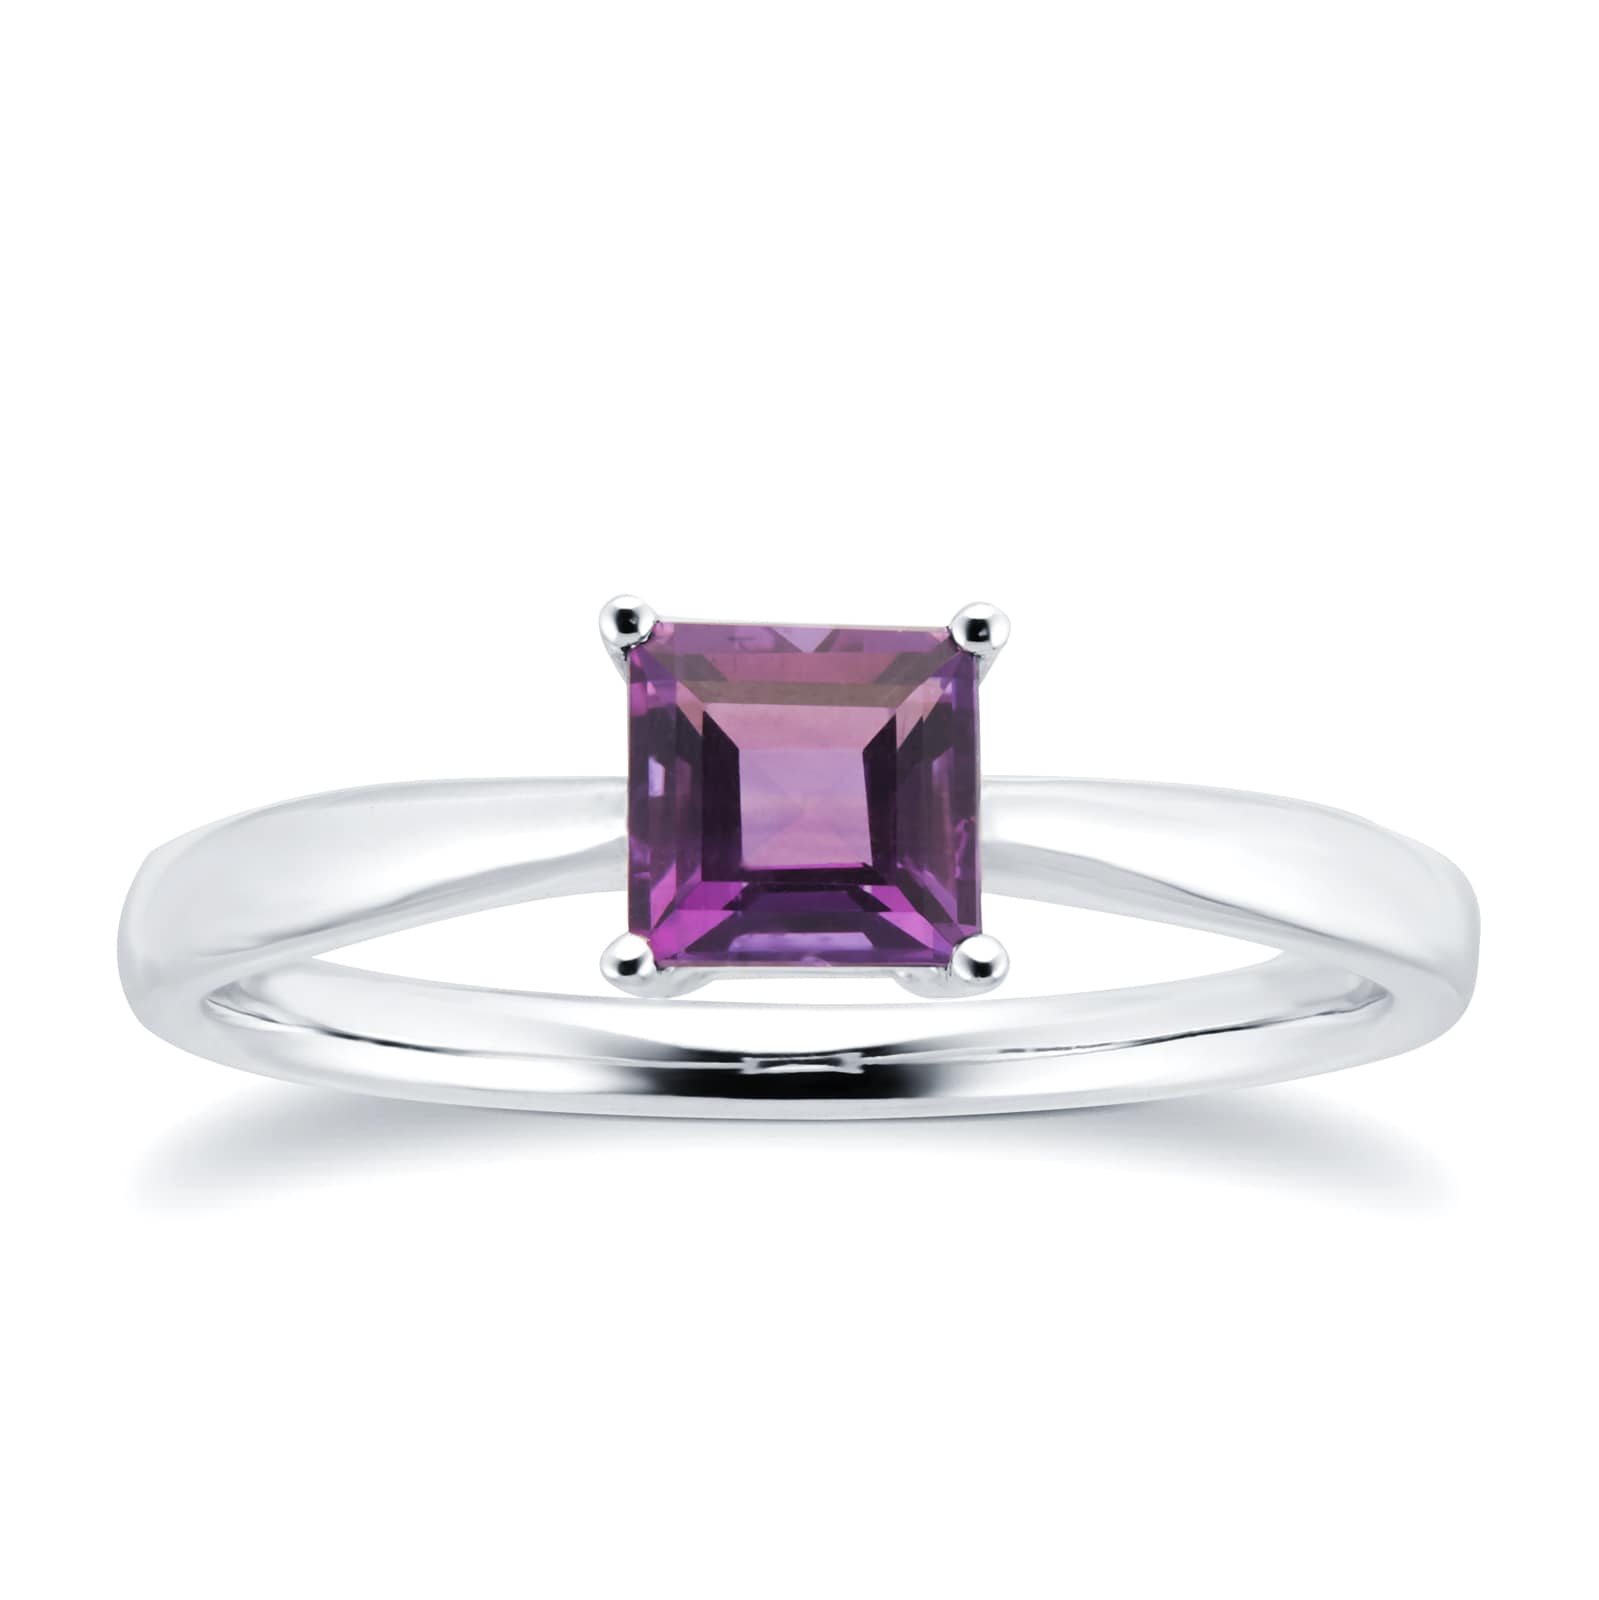 9ct White Gold 4 Claw Square Amethyst 5mm x 5mm Ring- Ring Size G